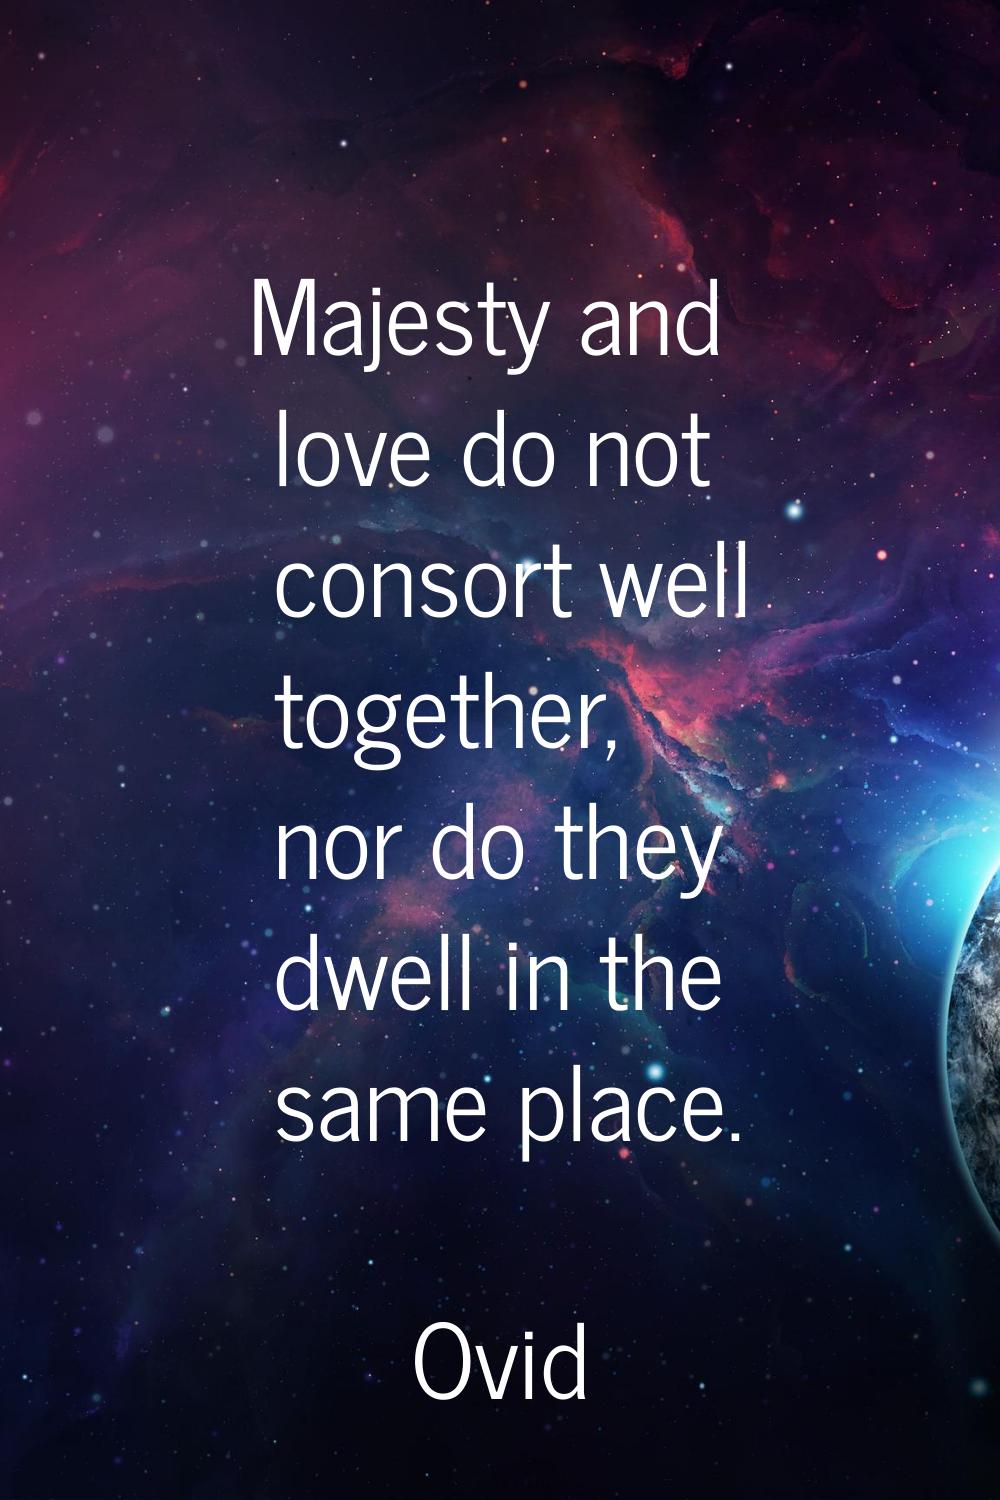 Majesty and love do not consort well together, nor do they dwell in the same place.